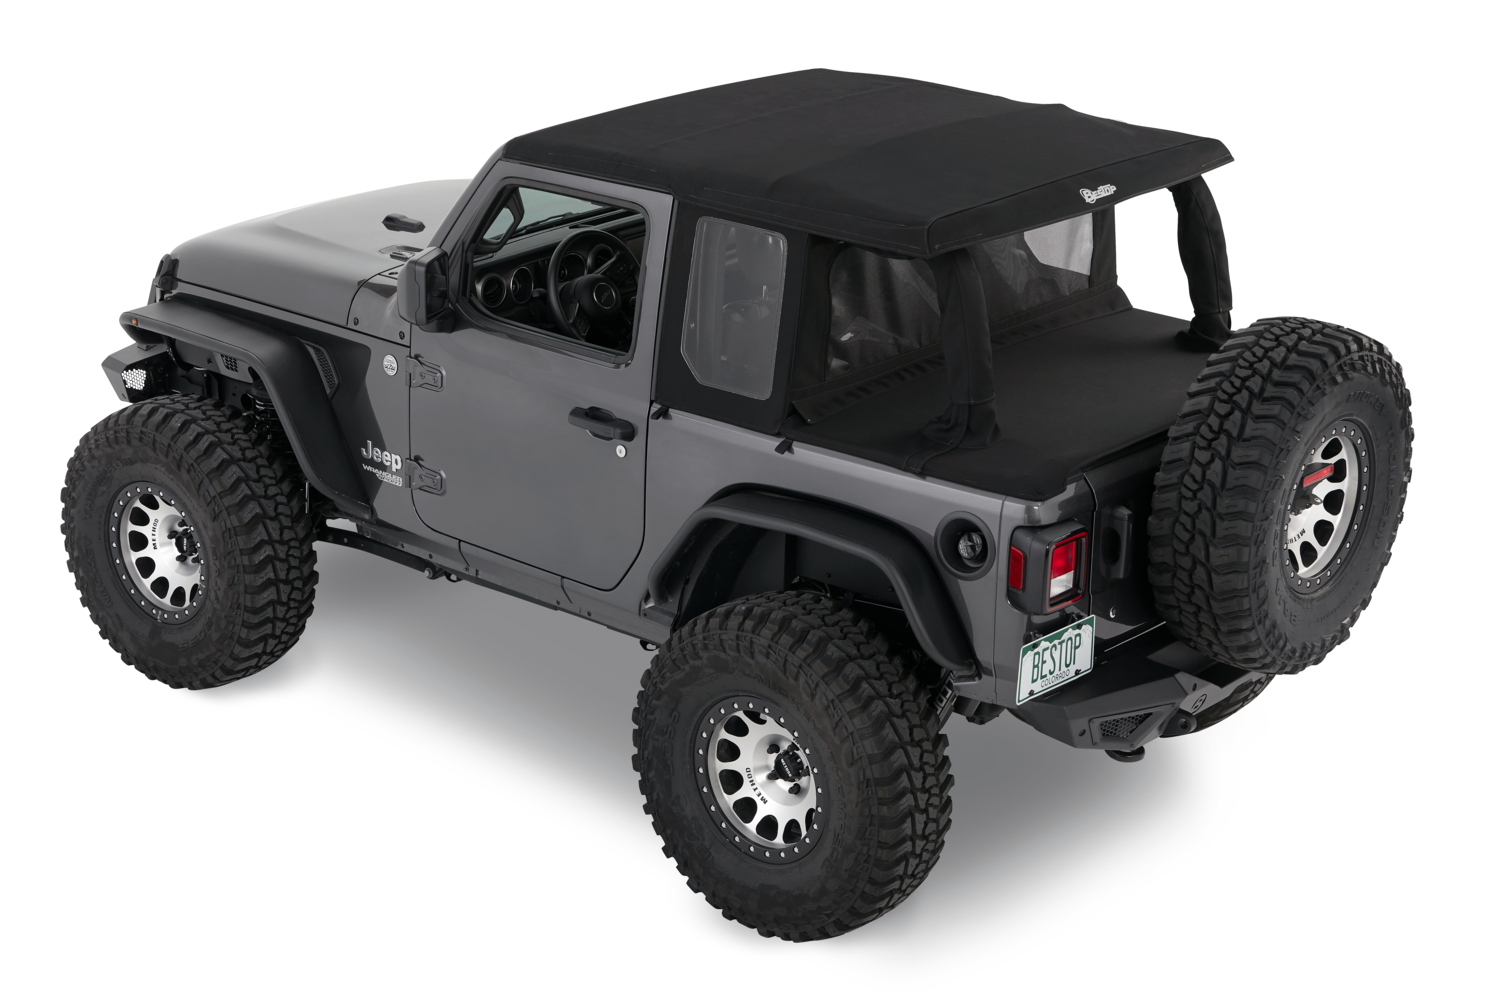 Bestop - 80101-17 - Halftop Accessory Kit Fits select: 2018-2019,2021 JEEP WRANGLER UNLIMITED - image 2 of 2